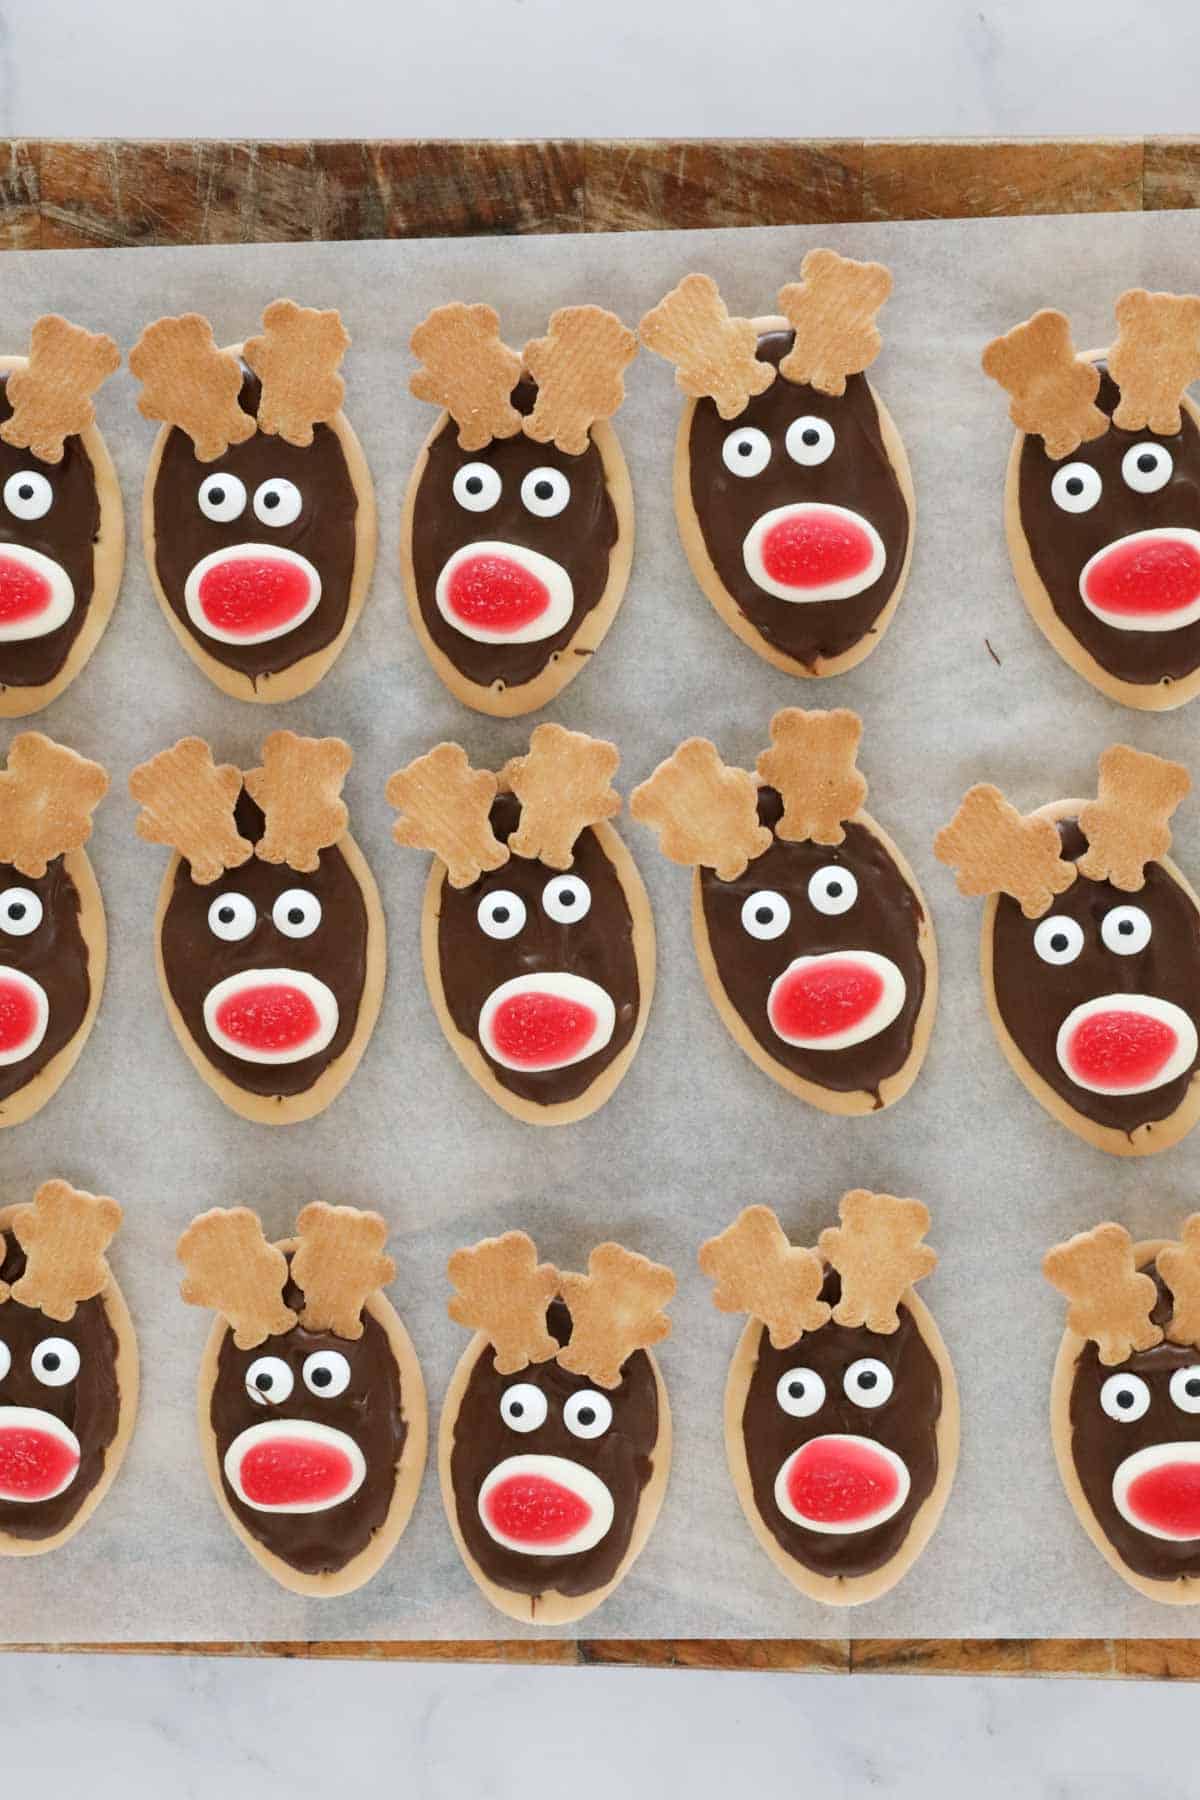 A tray of decorated reindeer faces.